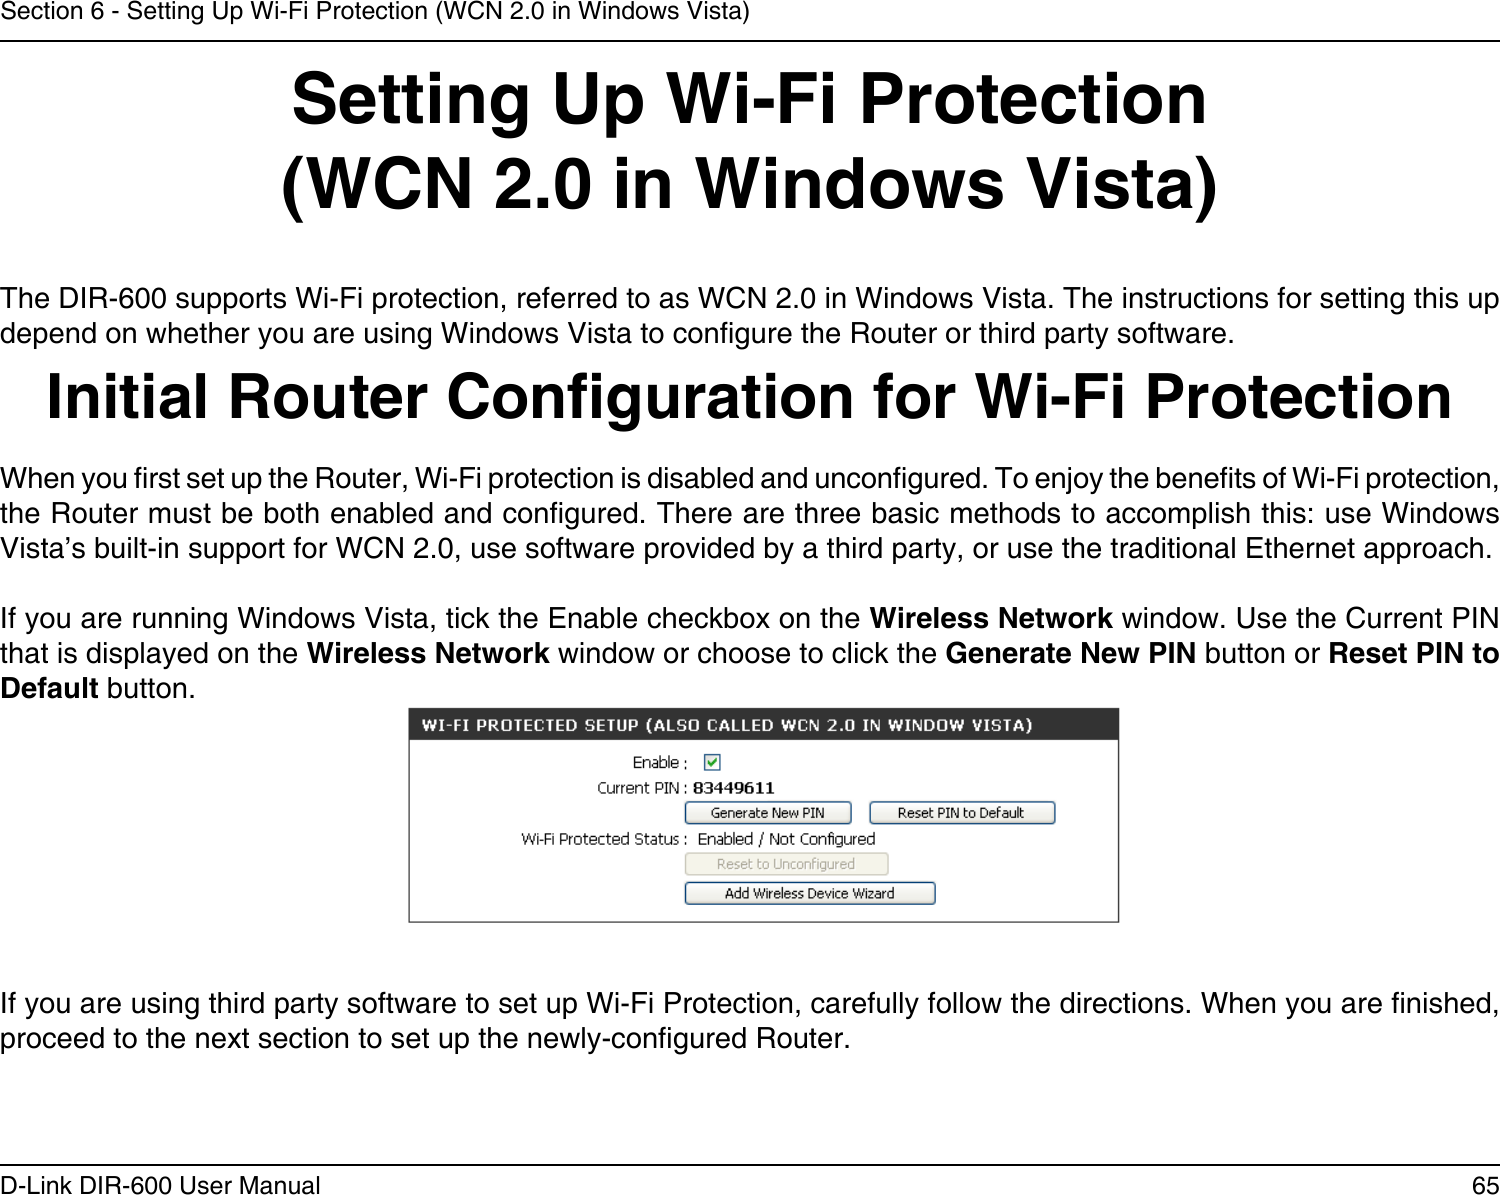 65D-Link DIR-600 User ManualSection 6 - Setting Up Wi-Fi Protection (WCN 2.0 in Windows Vista)Setting Up Wi-Fi Protection(WCN 2.0 in Windows Vista)The DIR-600 supports Wi-Fi protection, referred to as WCN 2.0 in Windows Vista. The instructions for setting this up depend on whether you are using Windows Vista to congure the Router or third party software.        Initial Router Conguration for Wi-Fi ProtectionWhen you rst set up the Router, Wi-Fi protection is disabled and uncongured. To enjoy the benets of Wi-Fi protection, the Router must be both enabled and congured. There are three basic methods to accomplish this: use Windows Vista’s built-in support for WCN 2.0, use software provided by a third party, or use the traditional Ethernet approach. If you are running Windows Vista, tick the Enable checkbox on the Wireless Network window. Use the Current PIN that is displayed on the Wireless Network window or choose to click the Generate New PIN button or Reset PIN to Default button. If you are using third party software to set up Wi-Fi Protection, carefully follow the directions. When you are nished, proceed to the next section to set up the newly-congured Router. 